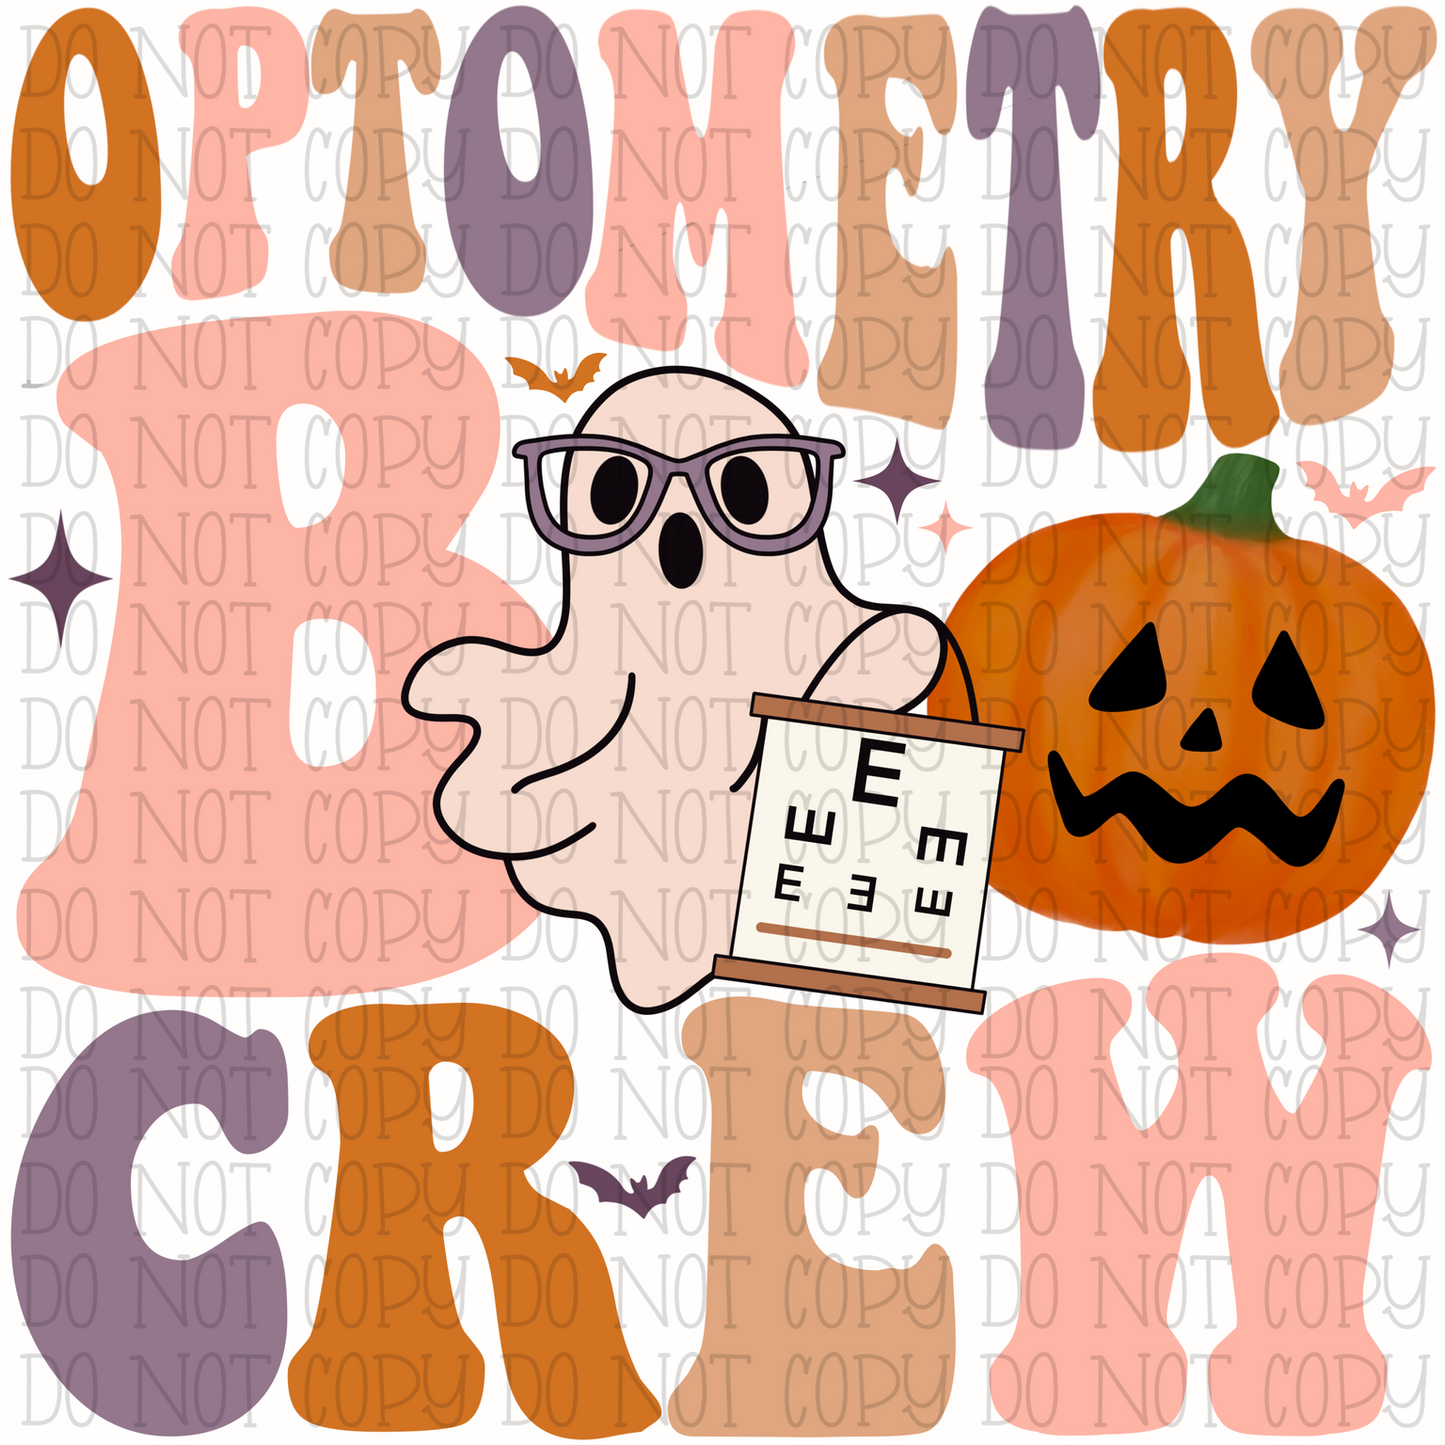 Optometry Boo Crew - Ghost with Glasses - Pocket Design Included